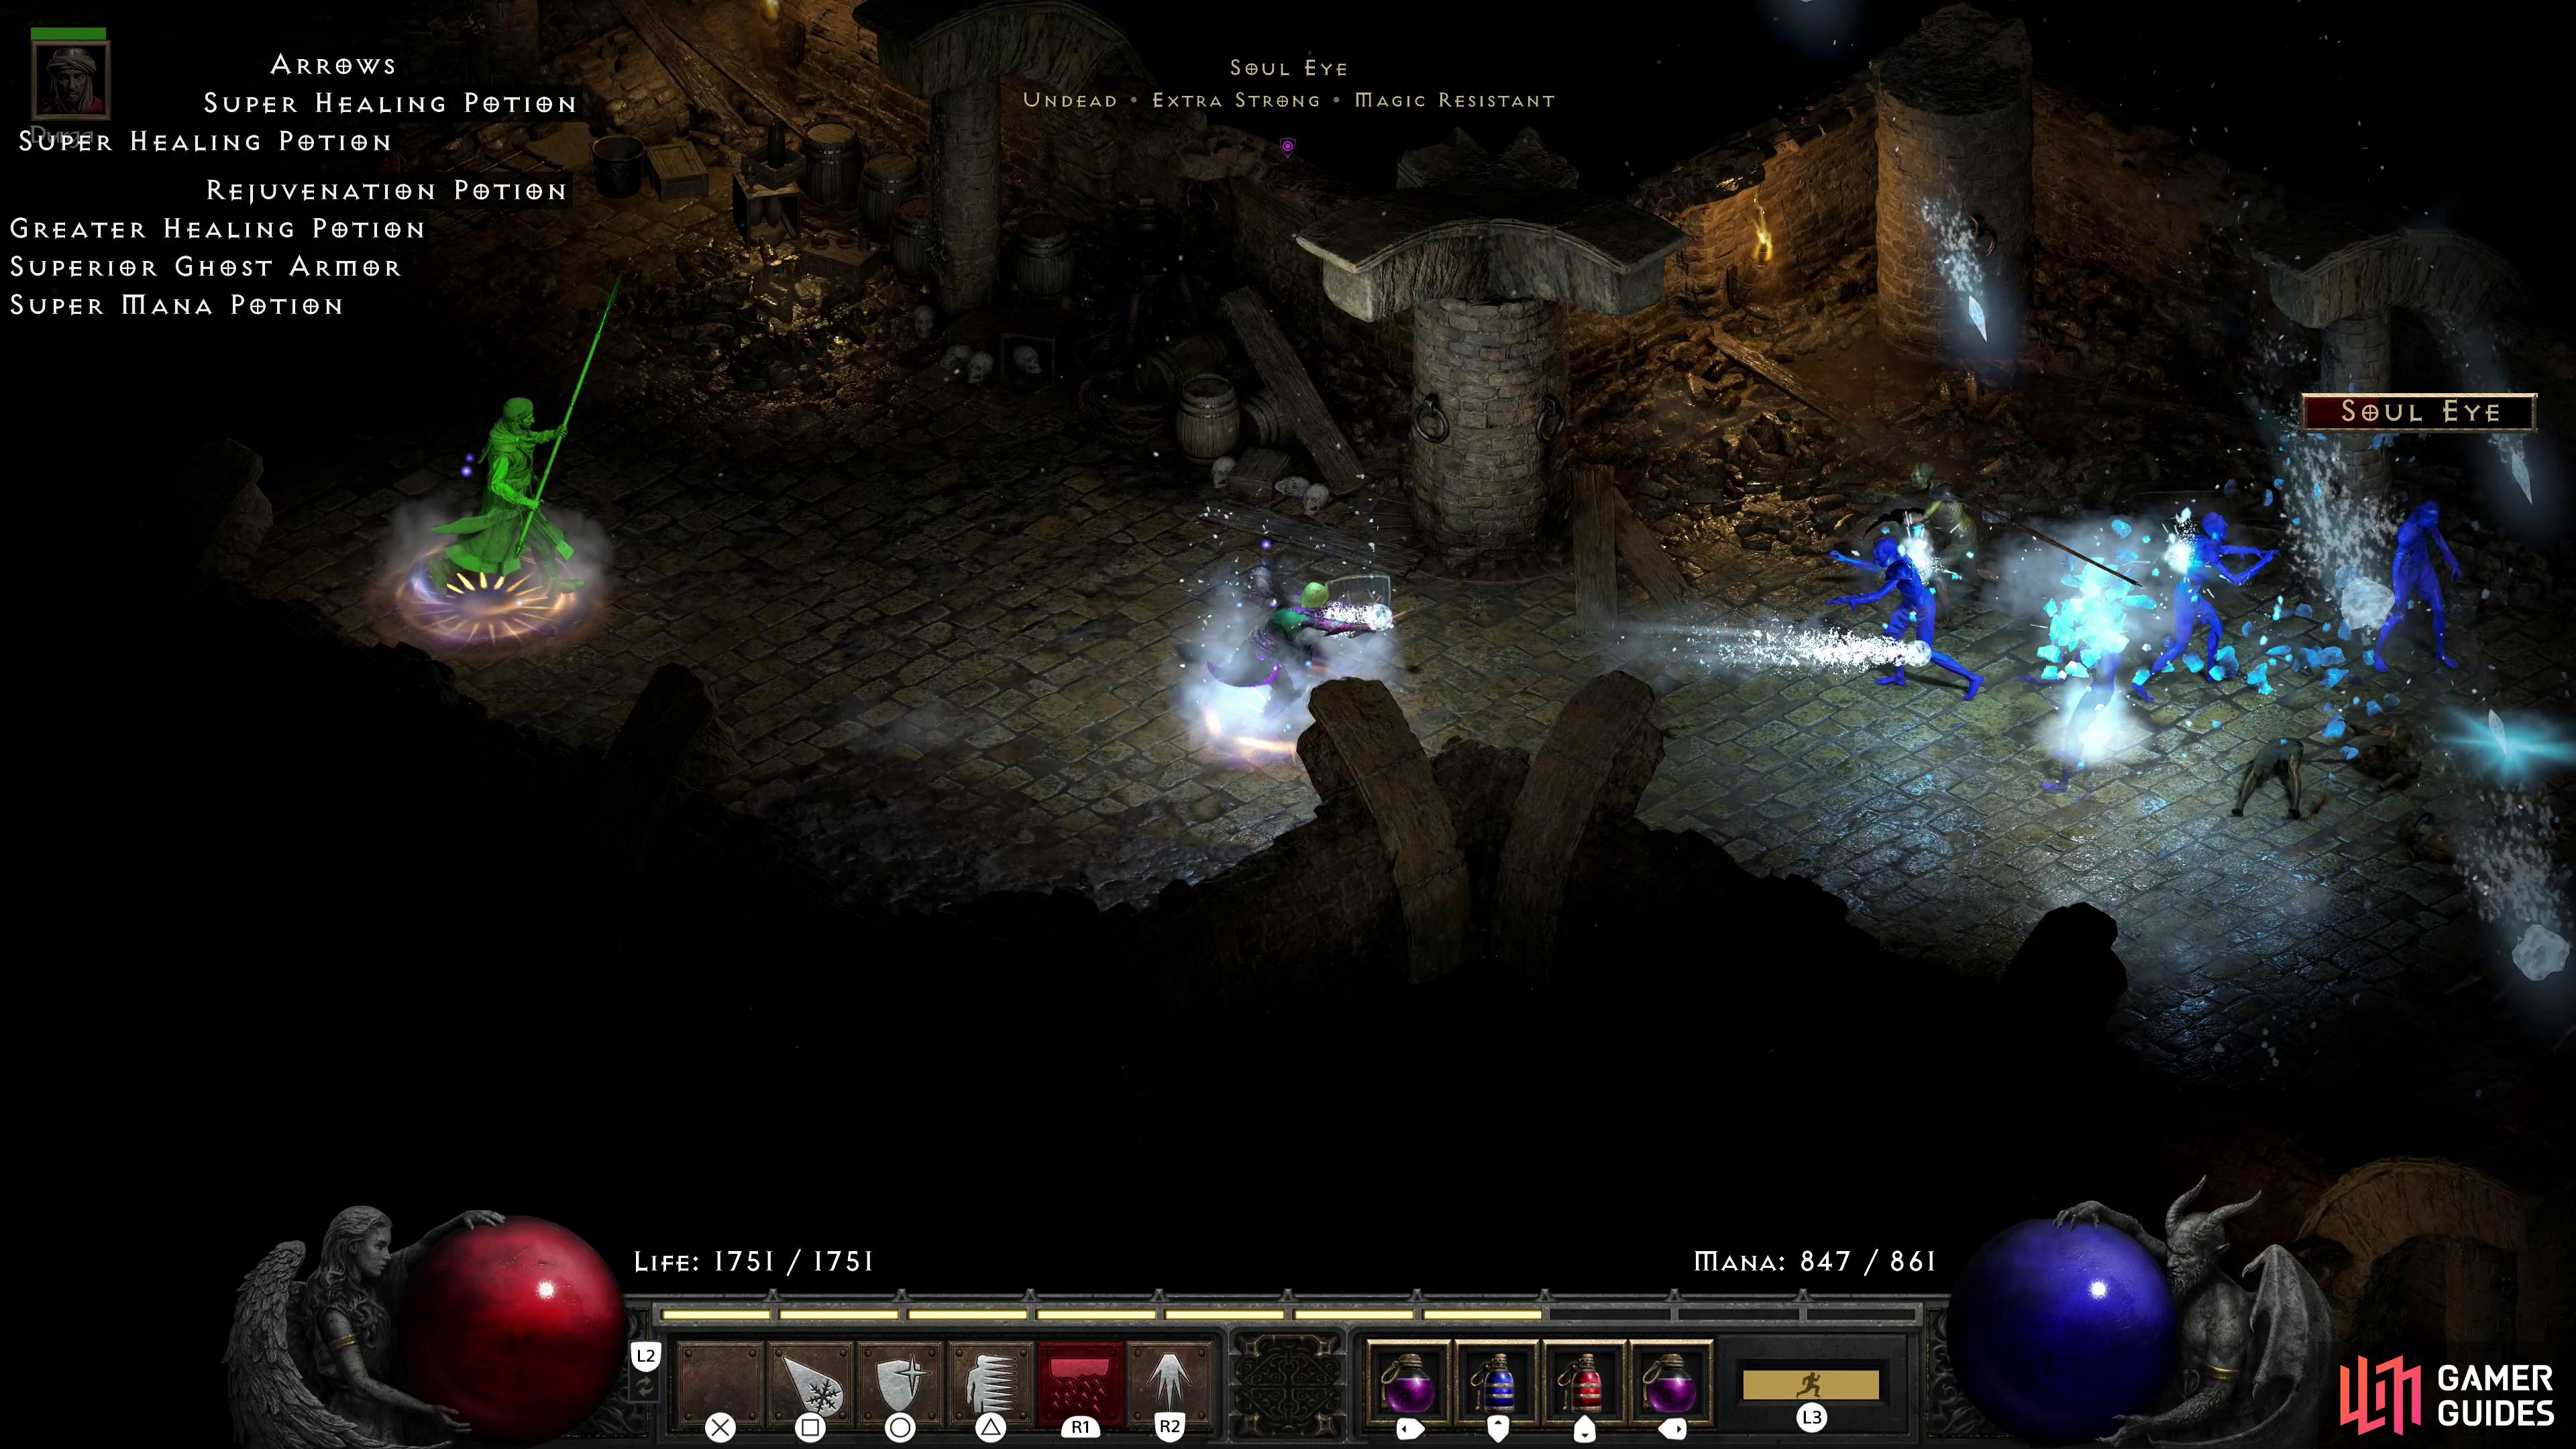 The Ancient Tunnels isn't as tame as the Mausoleum, but most of the enemies within aren't too difficult, and non are inherently cold immune. A Blizzard Sorceress with decent lightning resistance should have an easy time clearing this dungeon.